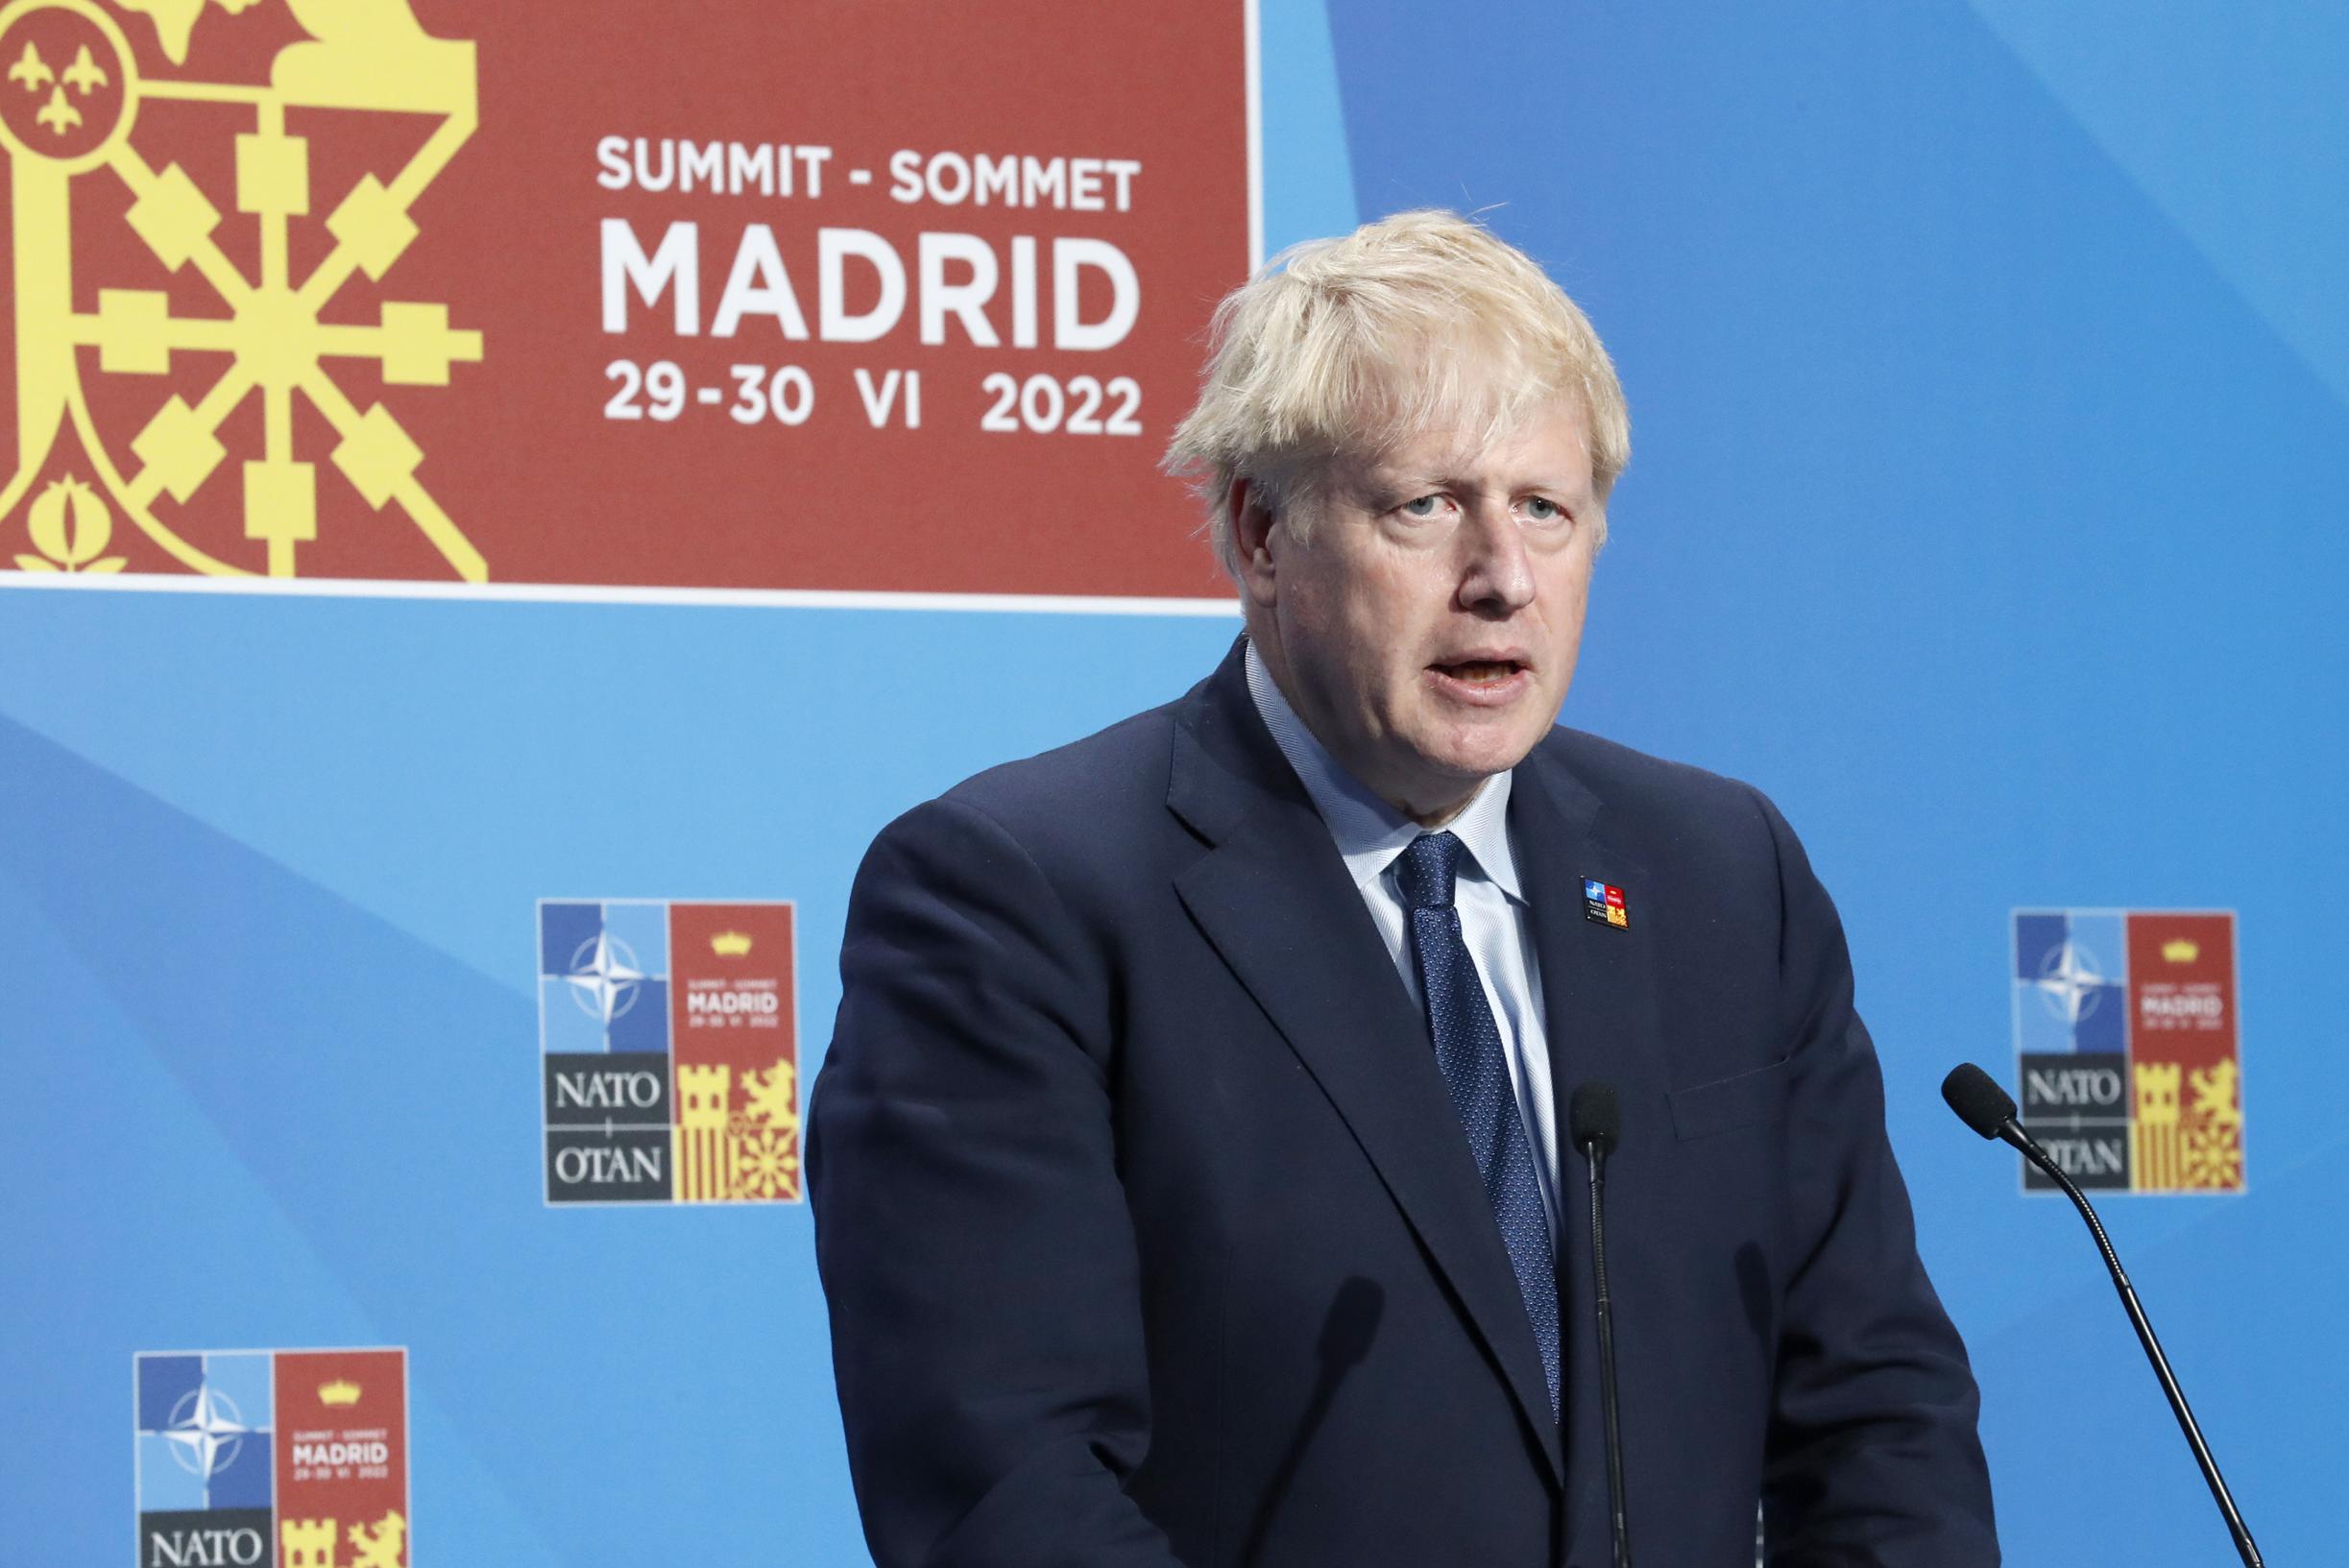 Boris Johnson wants NATO countries to spend 2.5 percent of GDP on defense by 2030